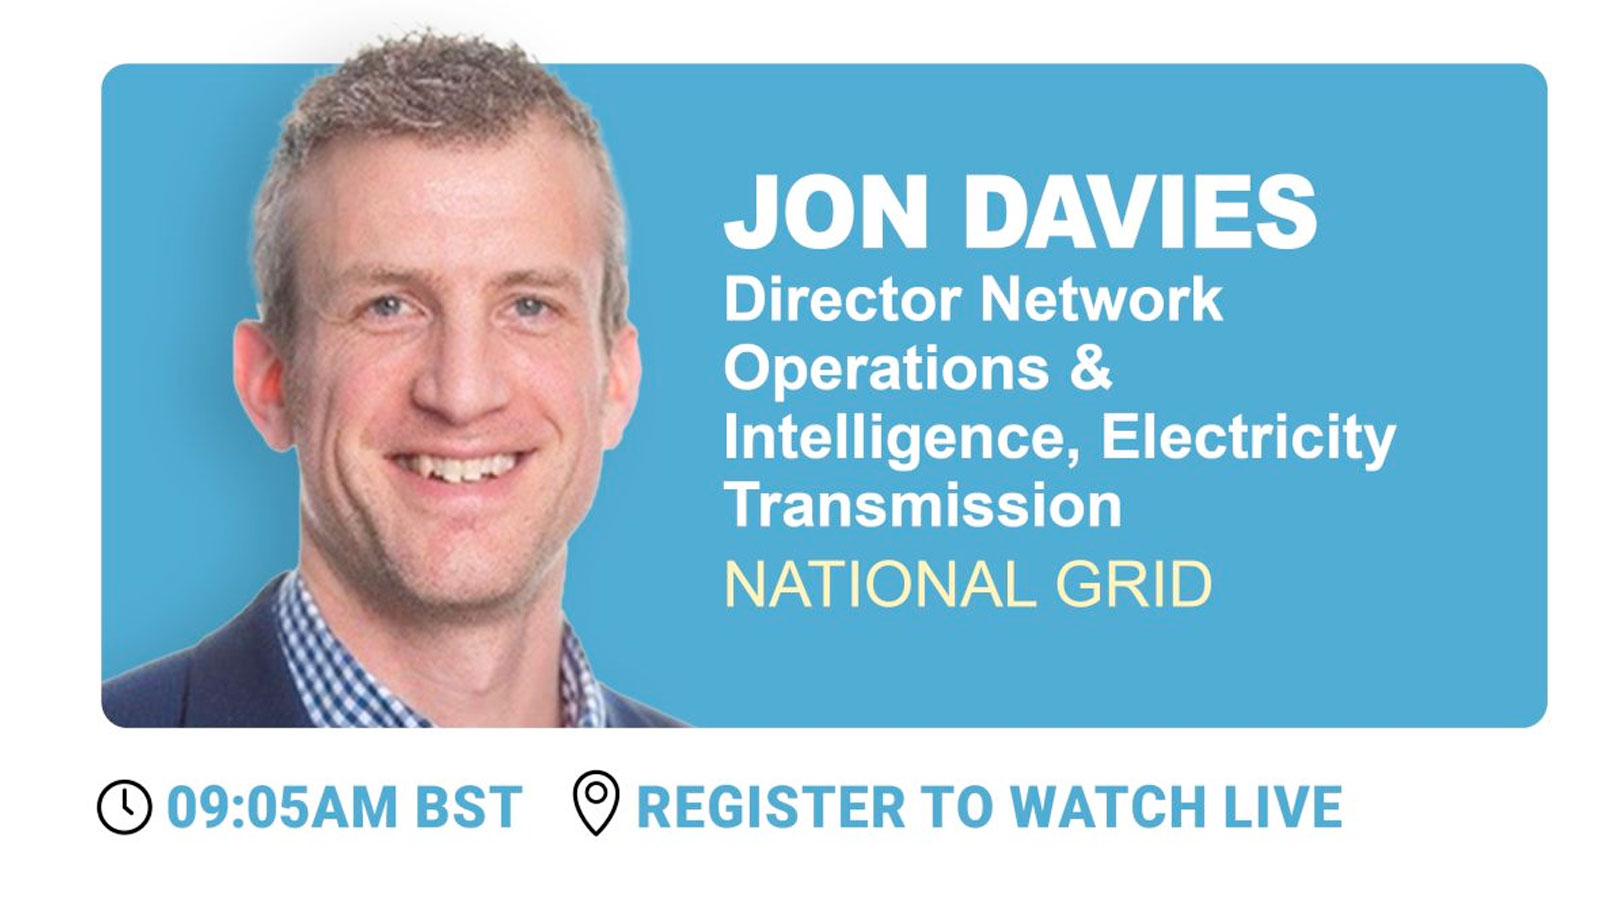 National Grid’s Jon Davies to discuss grid evolution at Powered On: Sustainability event